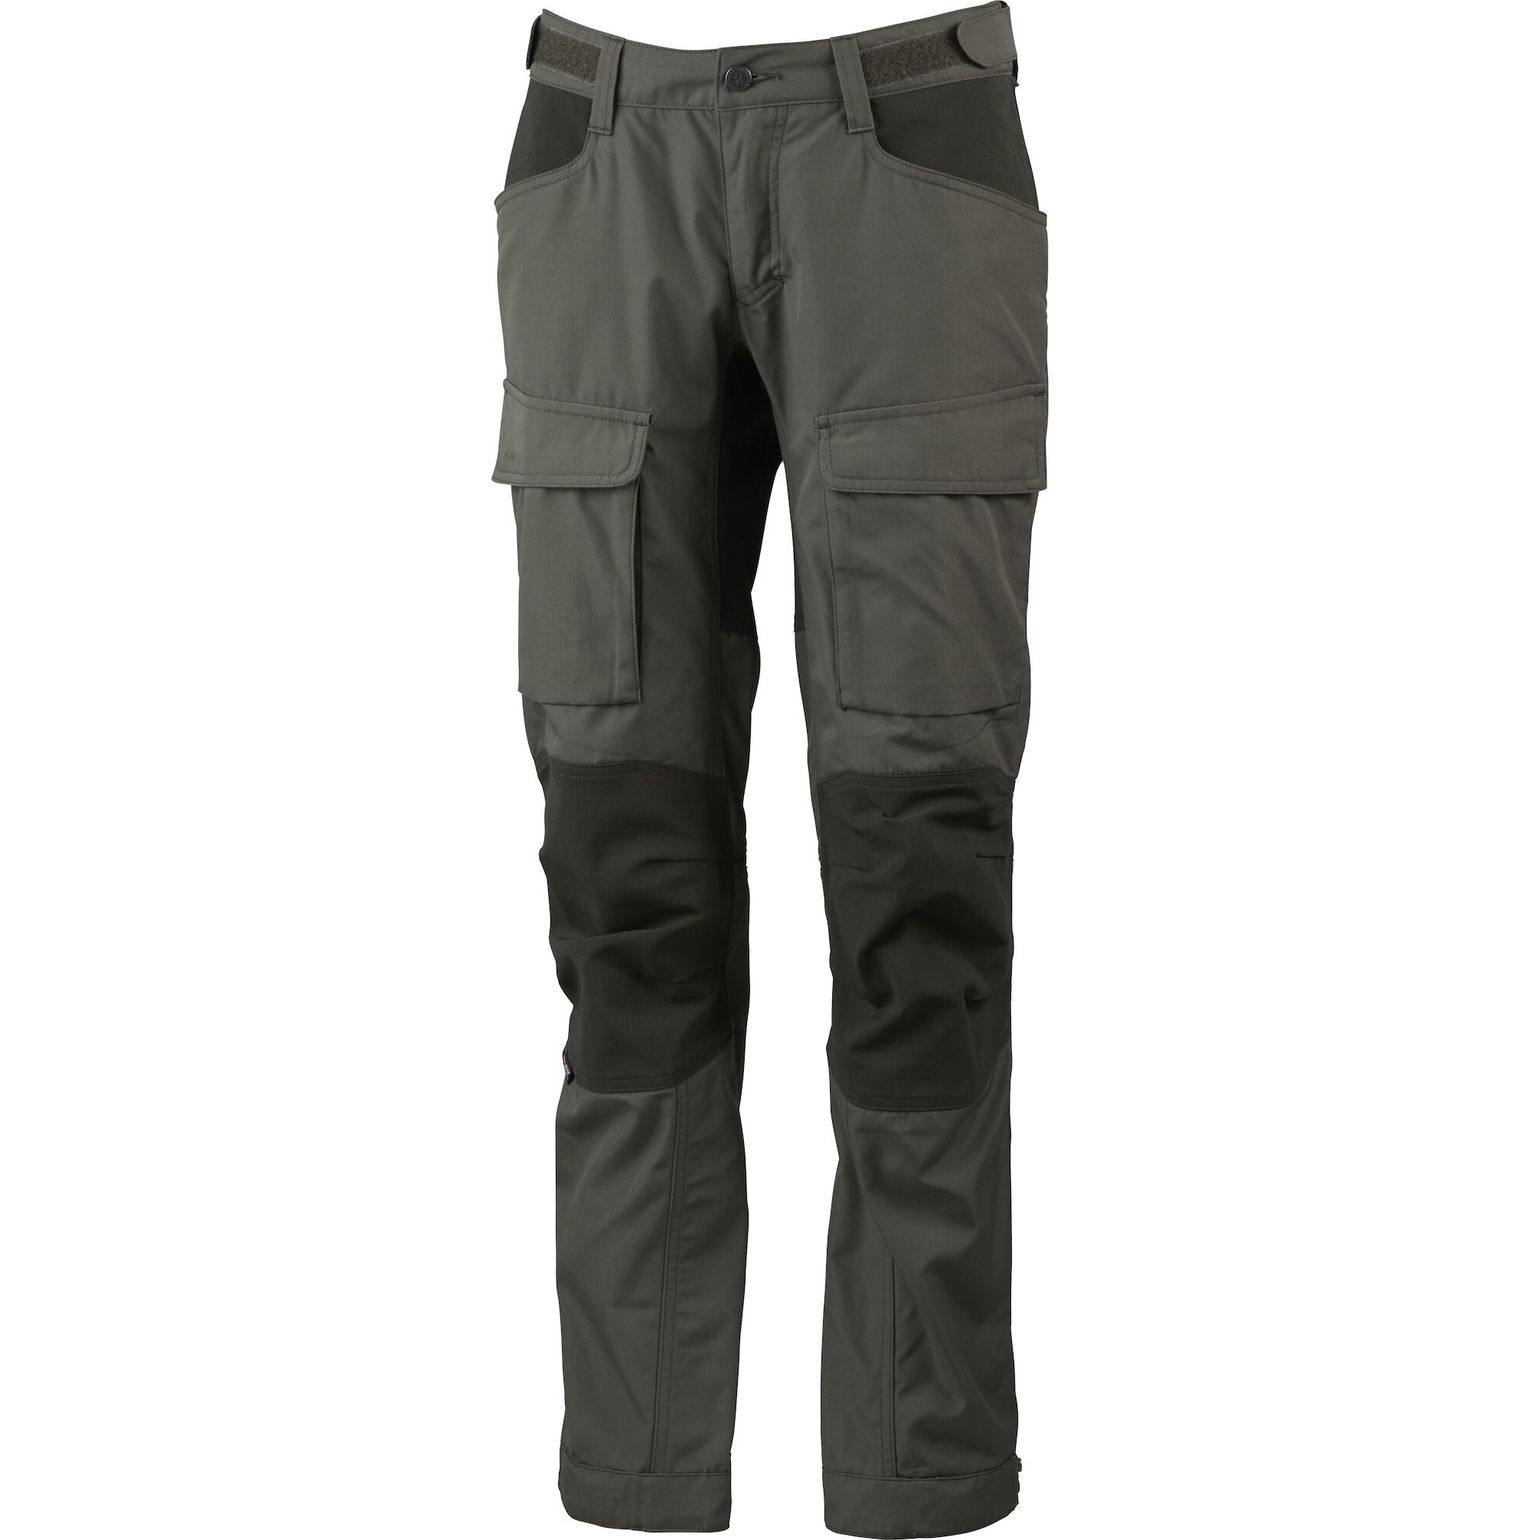 Lundhags Women's Authentic II Pant Forest Green/Dk Forest